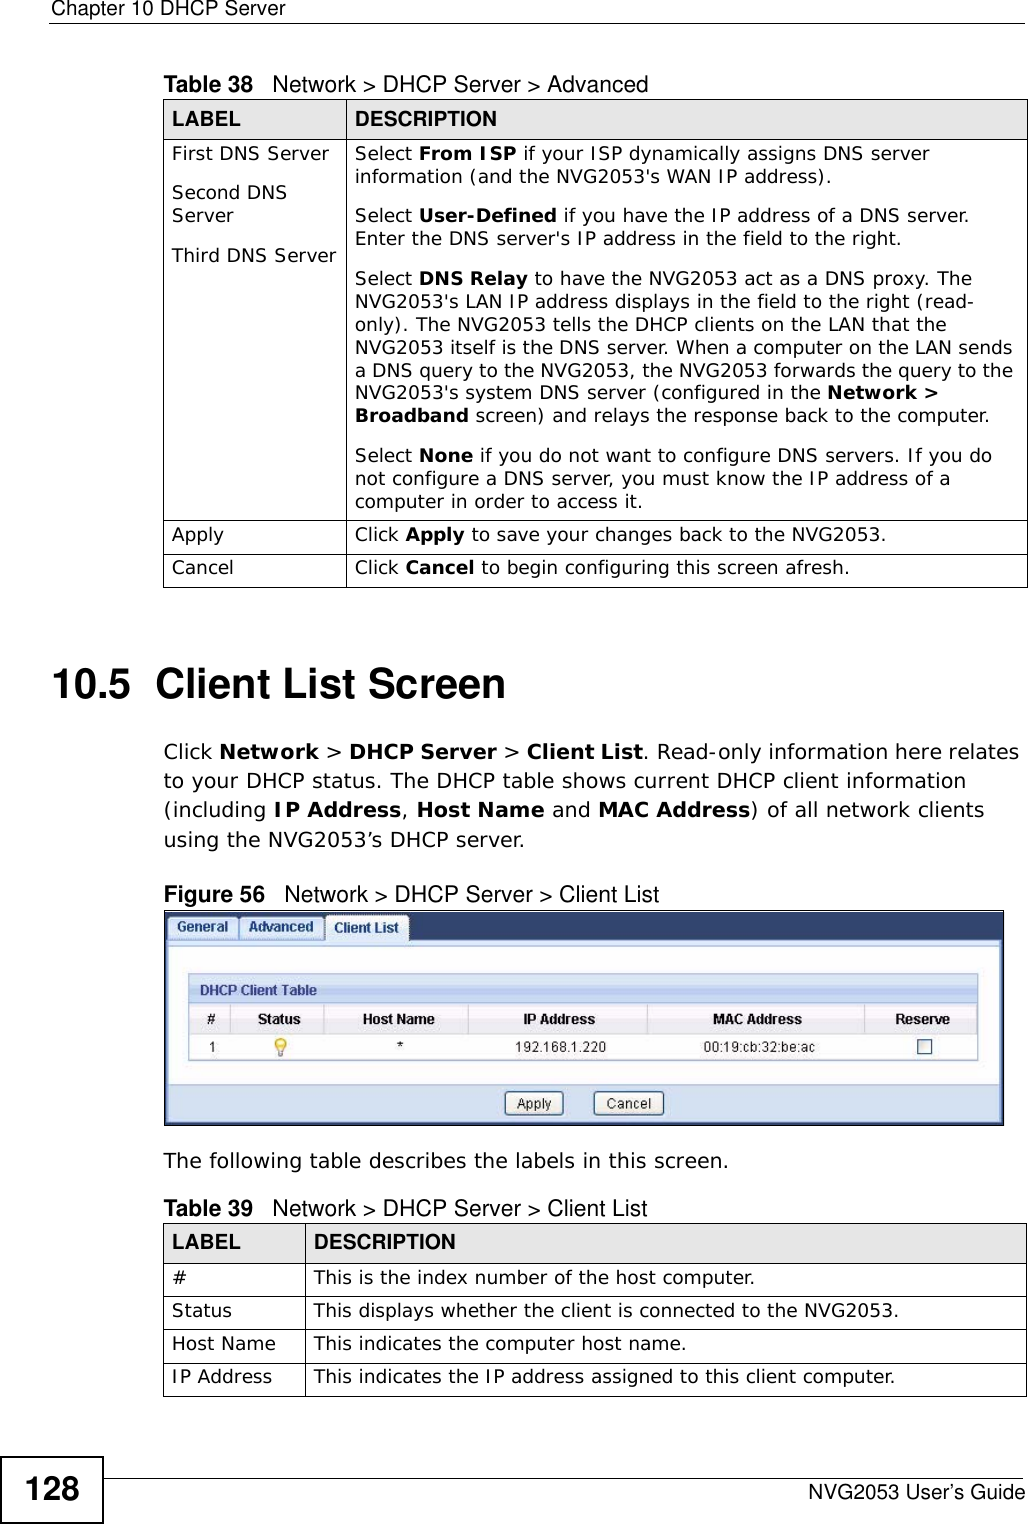 Chapter 10 DHCP ServerNVG2053 User’s Guide12810.5  Client List ScreenClick Network &gt; DHCP Server &gt; Client List. Read-only information here relates to your DHCP status. The DHCP table shows current DHCP client information (including IP Address, Host Name and MAC Address) of all network clients using the NVG2053’s DHCP server.Figure 56   Network &gt; DHCP Server &gt; Client List The following table describes the labels in this screen.First DNS ServerSecond DNS Server Third DNS ServerSelect From ISP if your ISP dynamically assigns DNS server information (and the NVG2053&apos;s WAN IP address). Select User-Defined if you have the IP address of a DNS server. Enter the DNS server&apos;s IP address in the field to the right. Select DNS Relay to have the NVG2053 act as a DNS proxy. The NVG2053&apos;s LAN IP address displays in the field to the right (read-only). The NVG2053 tells the DHCP clients on the LAN that the NVG2053 itself is the DNS server. When a computer on the LAN sends a DNS query to the NVG2053, the NVG2053 forwards the query to the NVG2053&apos;s system DNS server (configured in the Network &gt; Broadband screen) and relays the response back to the computer. Select None if you do not want to configure DNS servers. If you do not configure a DNS server, you must know the IP address of a computer in order to access it.Apply Click Apply to save your changes back to the NVG2053.Cancel Click Cancel to begin configuring this screen afresh.Table 38   Network &gt; DHCP Server &gt; AdvancedLABEL DESCRIPTIONTable 39   Network &gt; DHCP Server &gt; Client ListLABEL  DESCRIPTION#  This is the index number of the host computer.Status This displays whether the client is connected to the NVG2053.Host Name  This indicates the computer host name.IP Address This indicates the IP address assigned to this client computer.